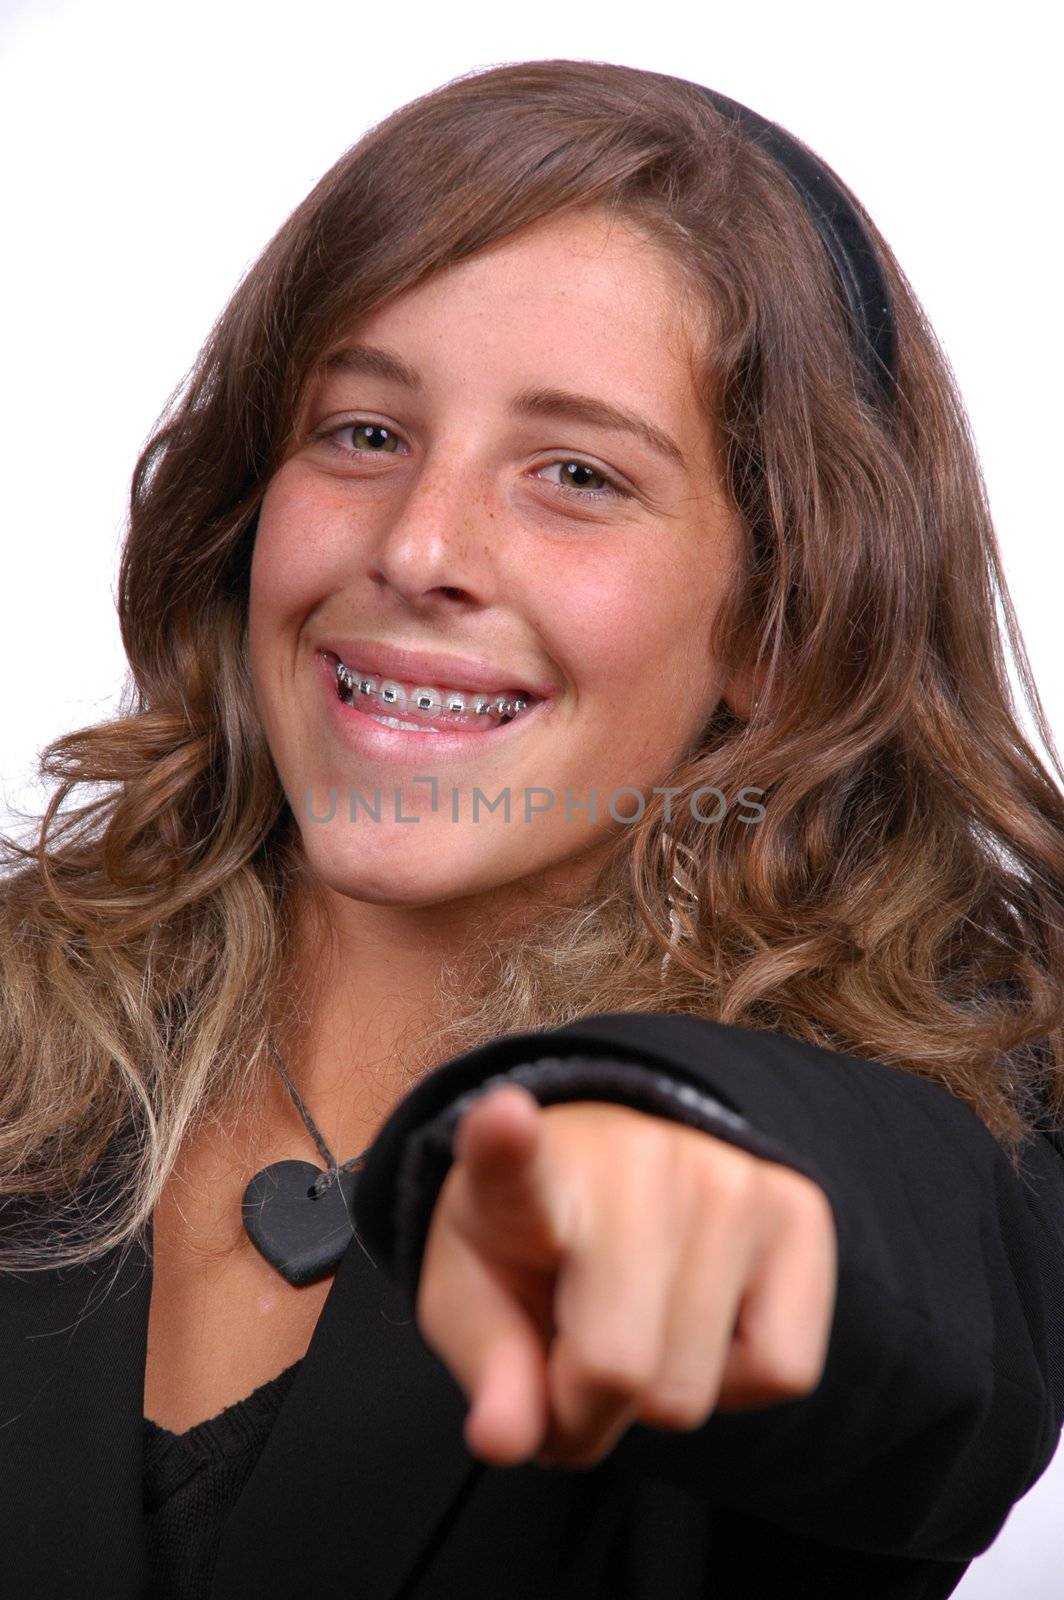 blonde teenager pointing a finger